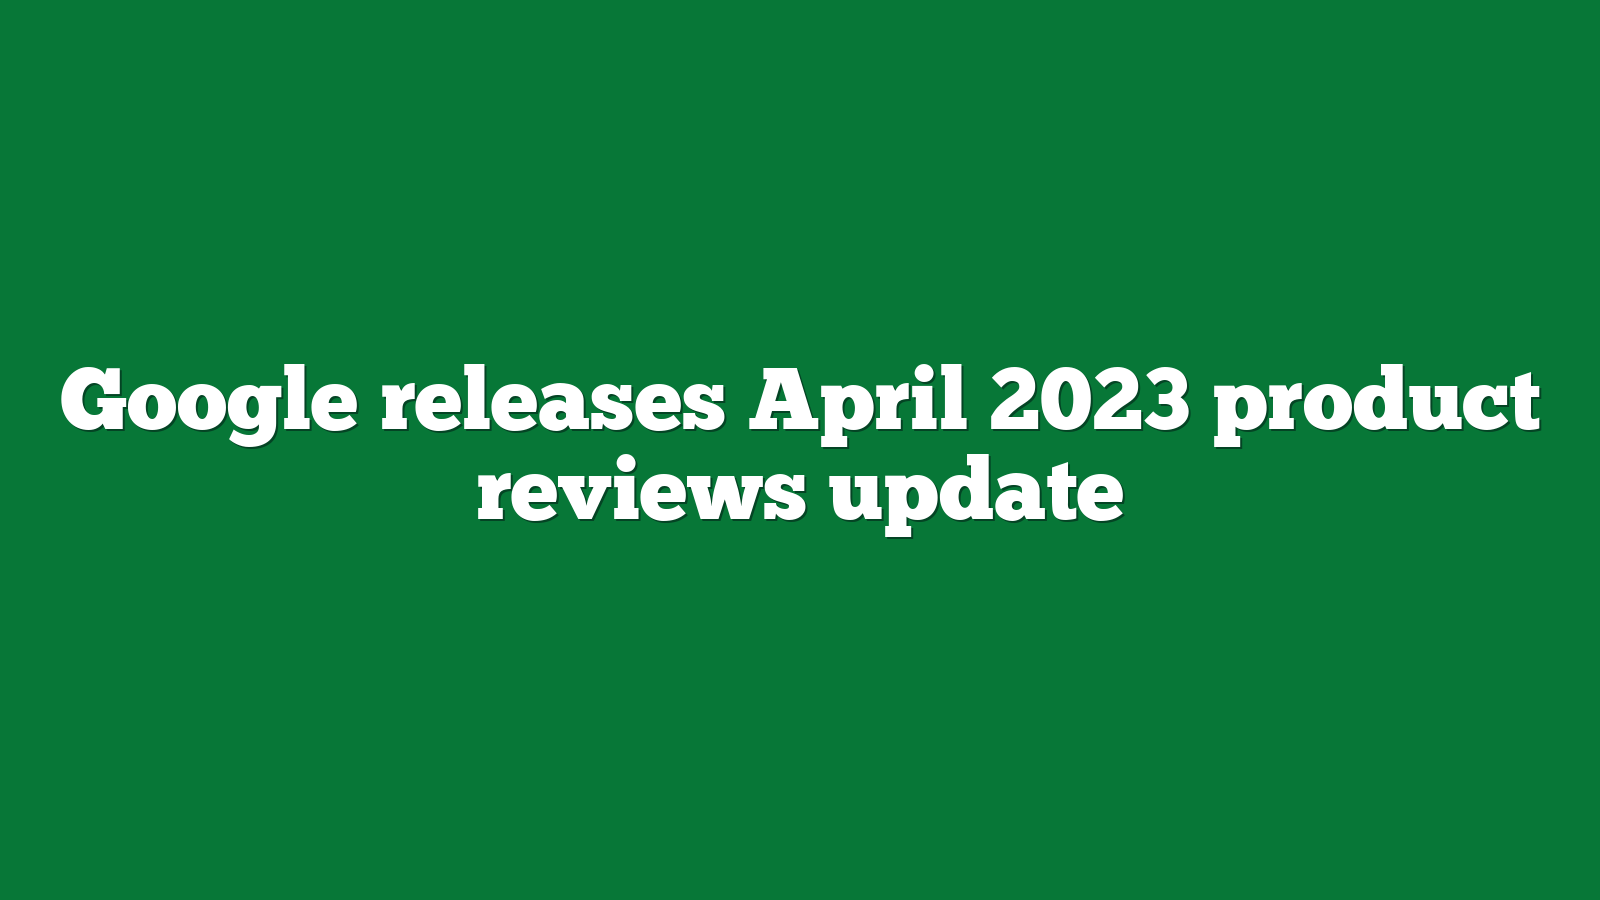 Google releases April 2023 product reviews update